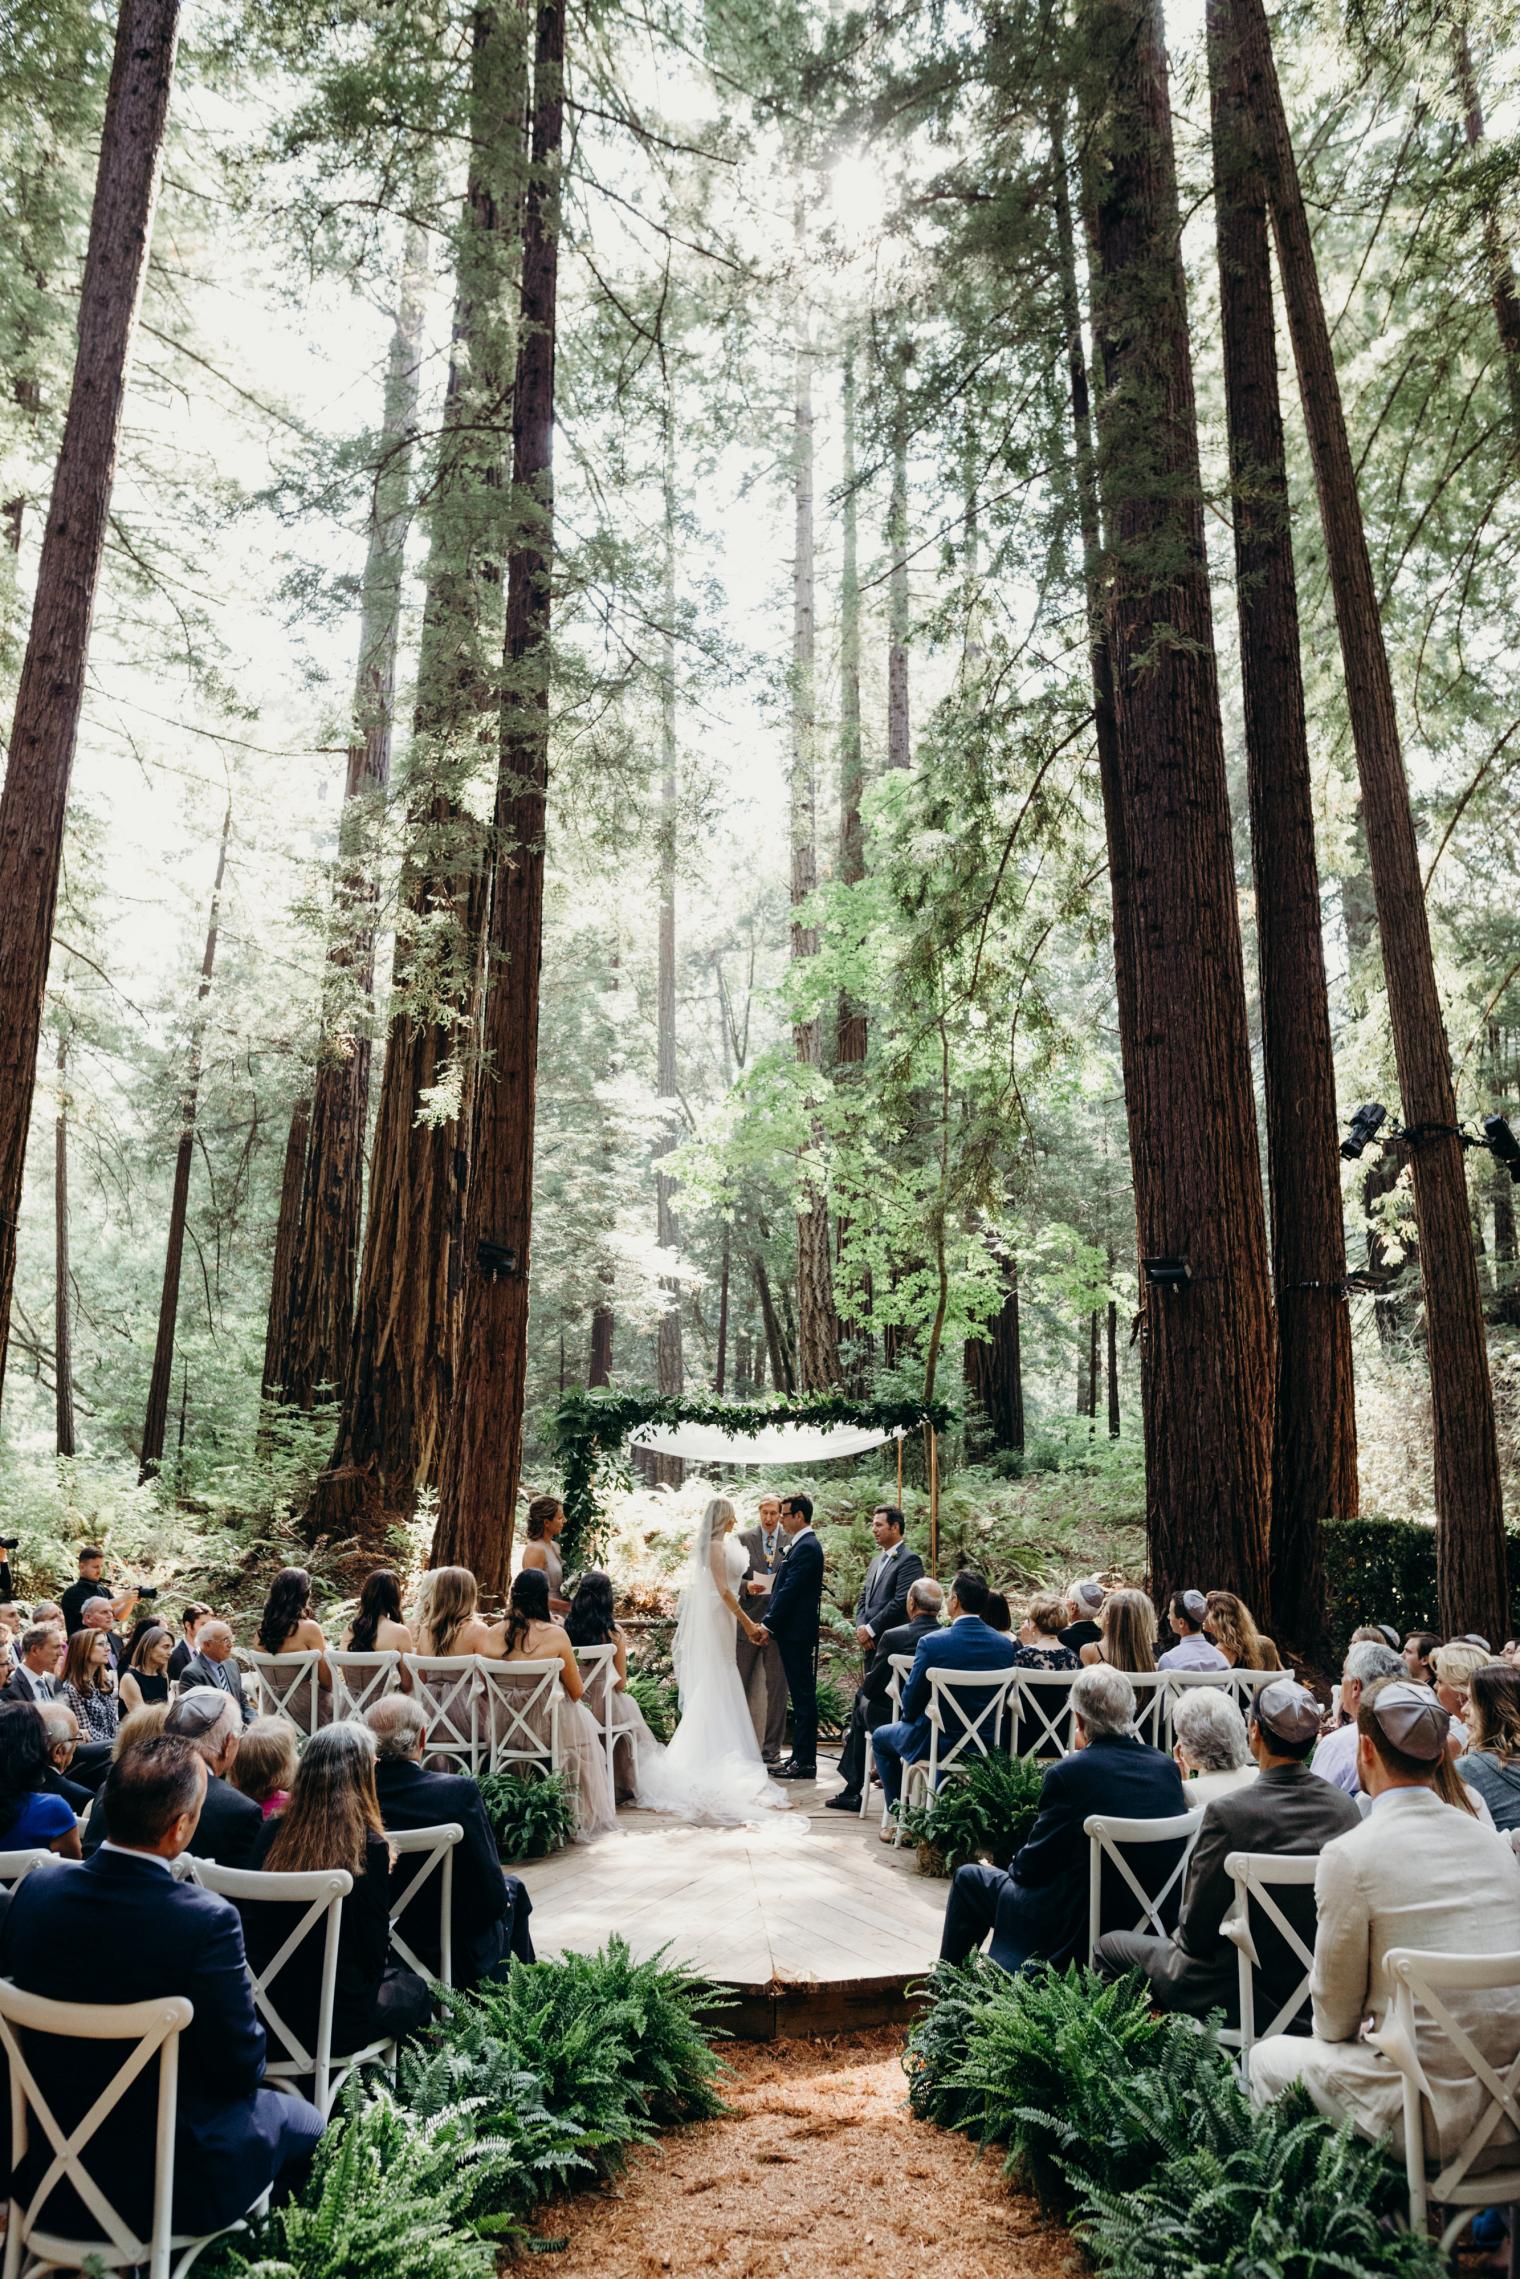 Magical Forest Wedding Venues You'll Want to Get Lost In